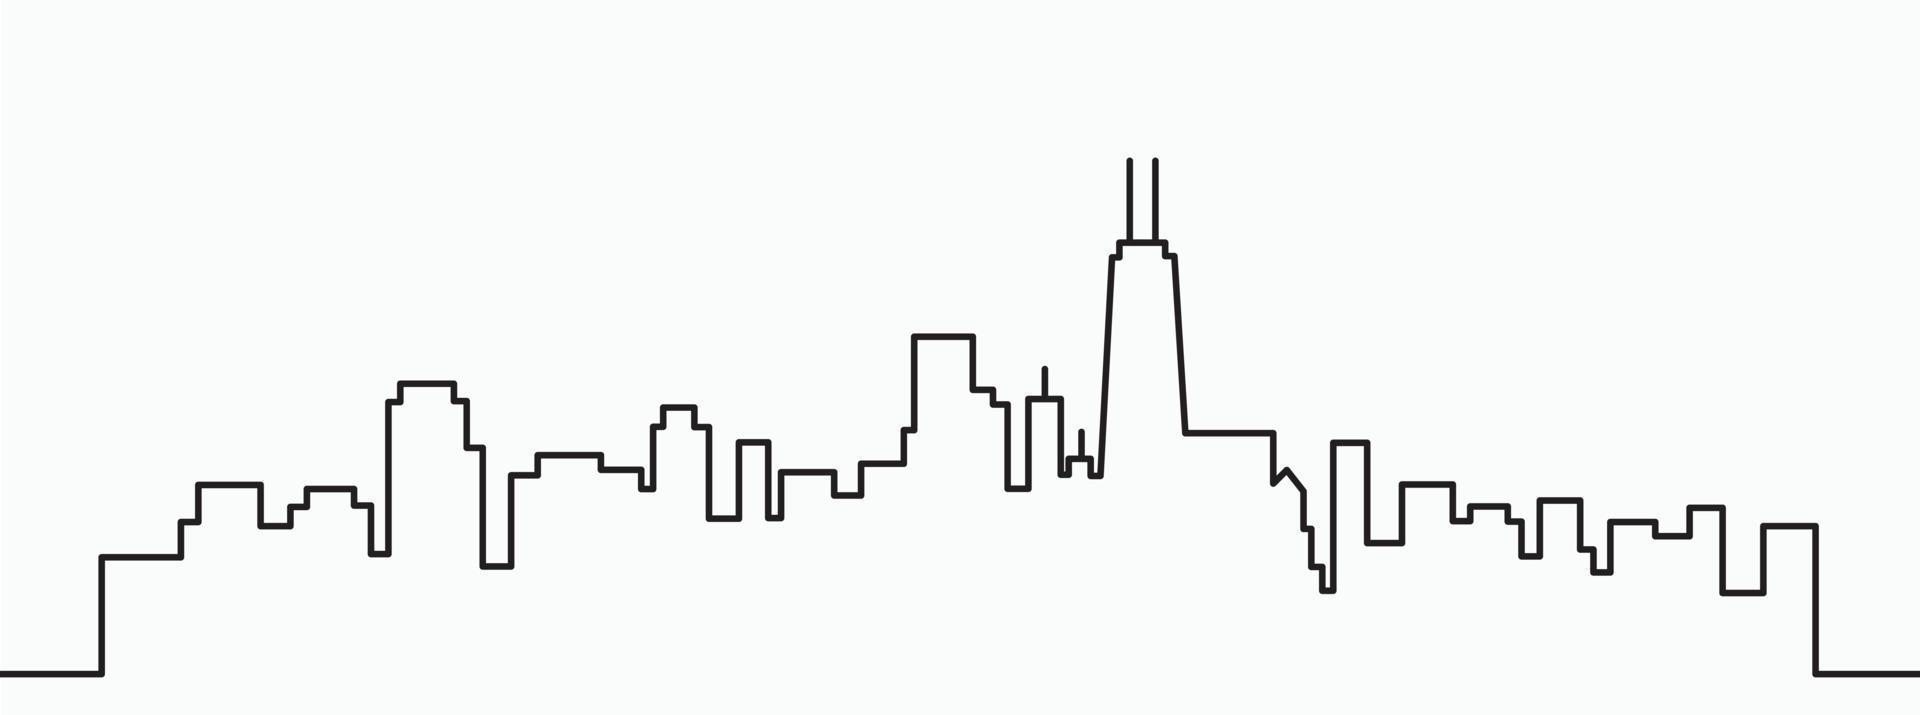 Modern City Skyline outline drawing on white background. vector